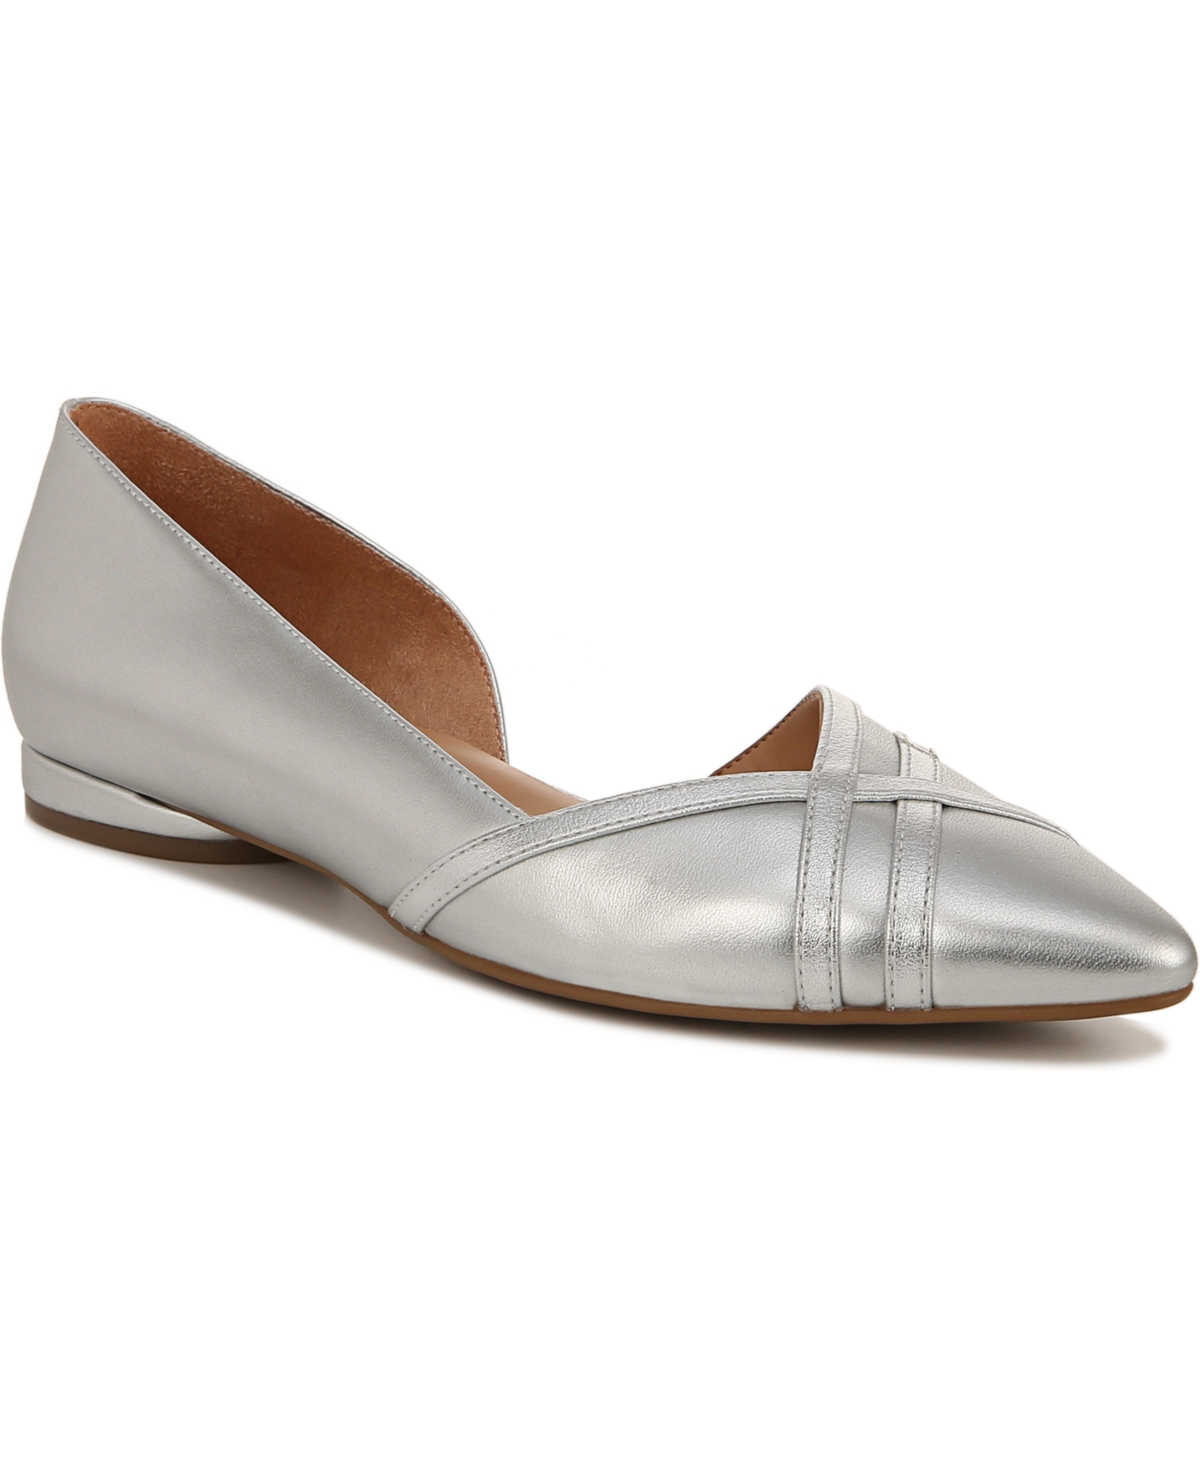 Naturalizer Barlow Flats In Silver Metallic Faux Leather